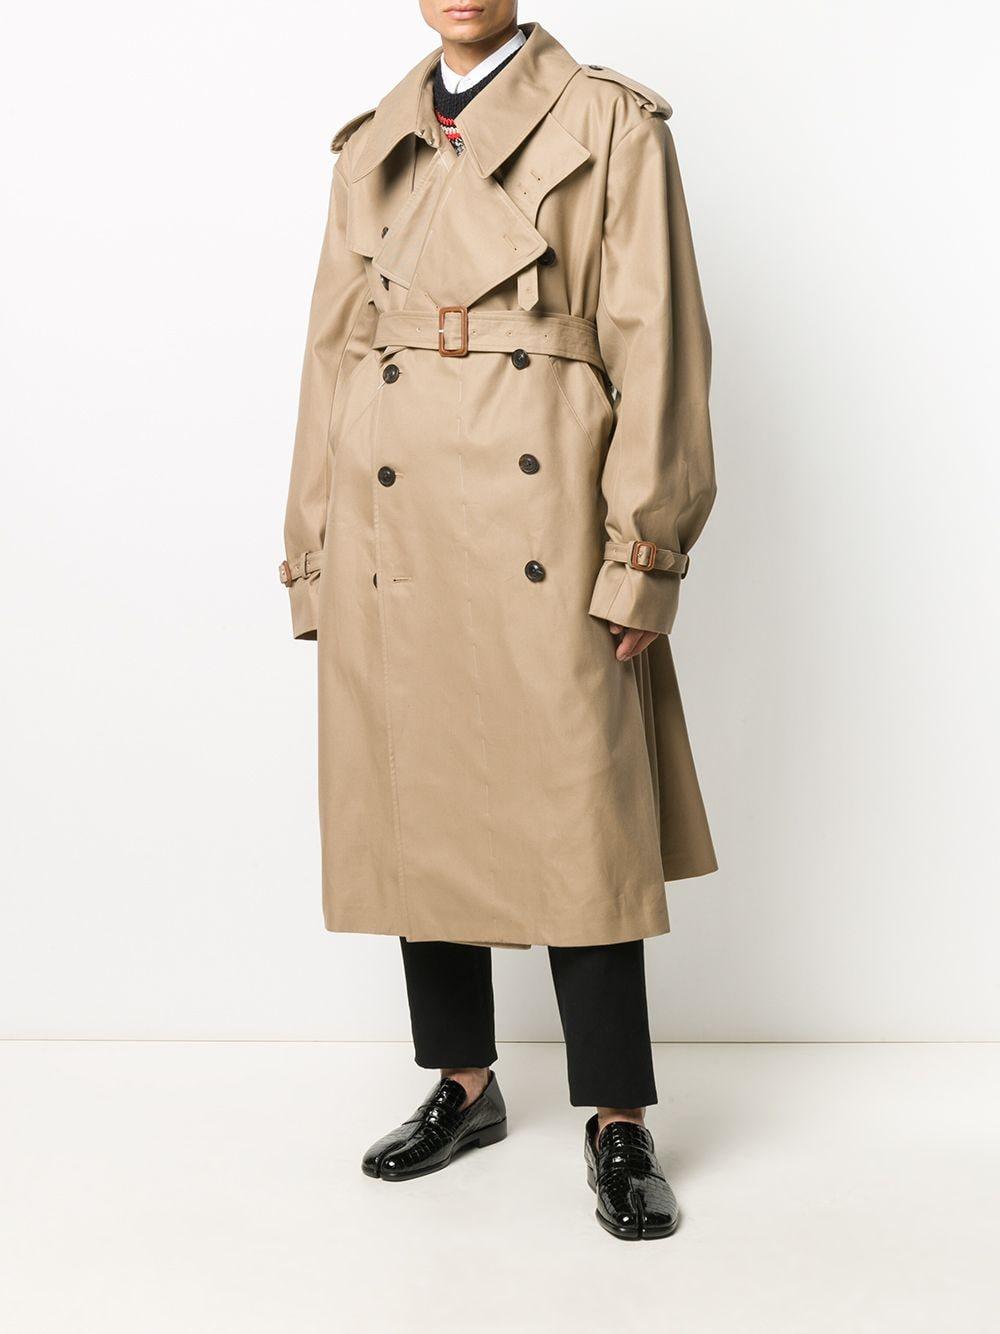 Maison Margiela Cotton Double-breasted Trench Coat in Brown for Men - Lyst